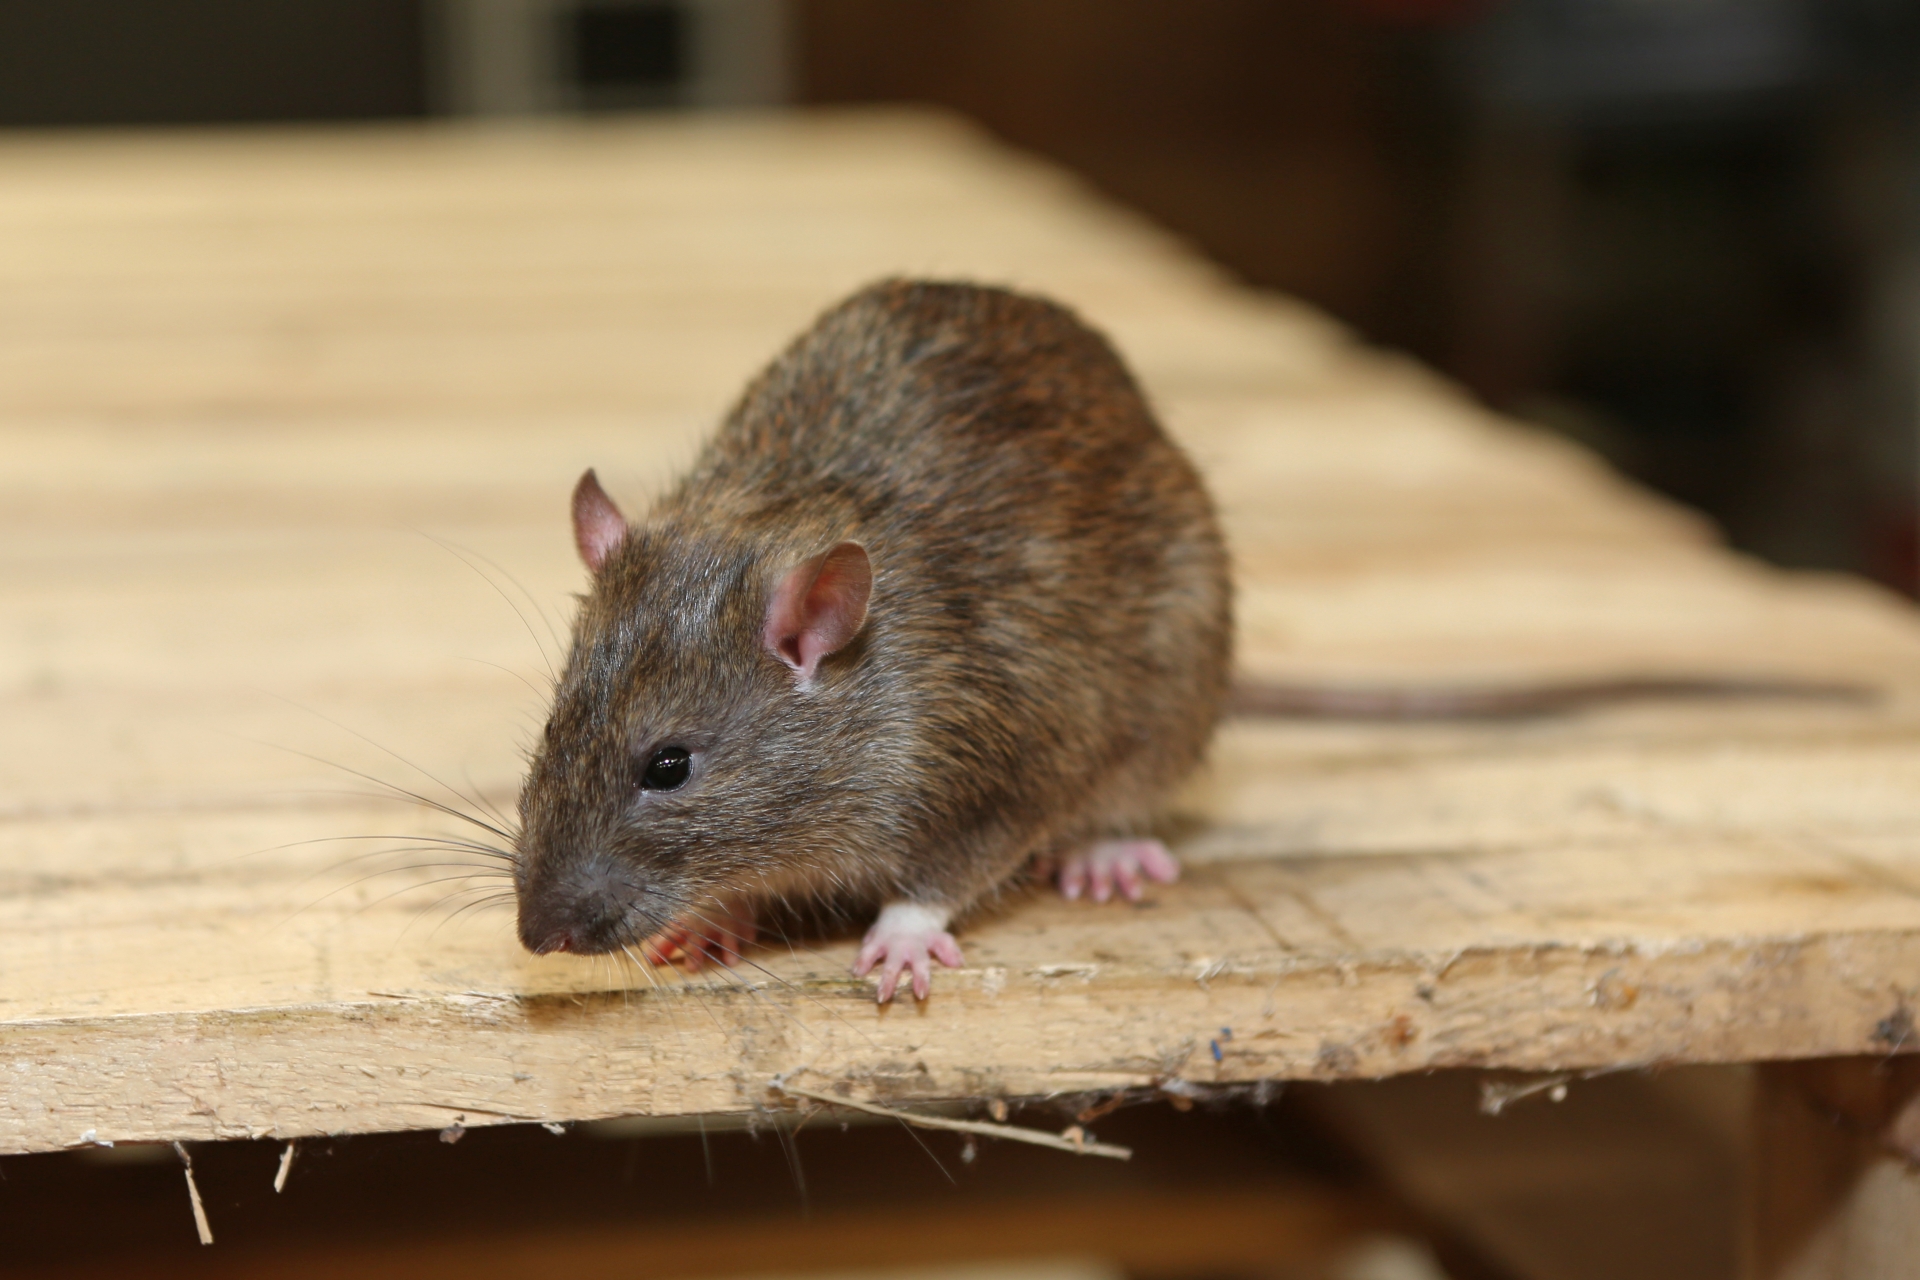 Rat extermination, Pest Control in Garston, Leavesden, WD25. Call Now 020 8166 9746